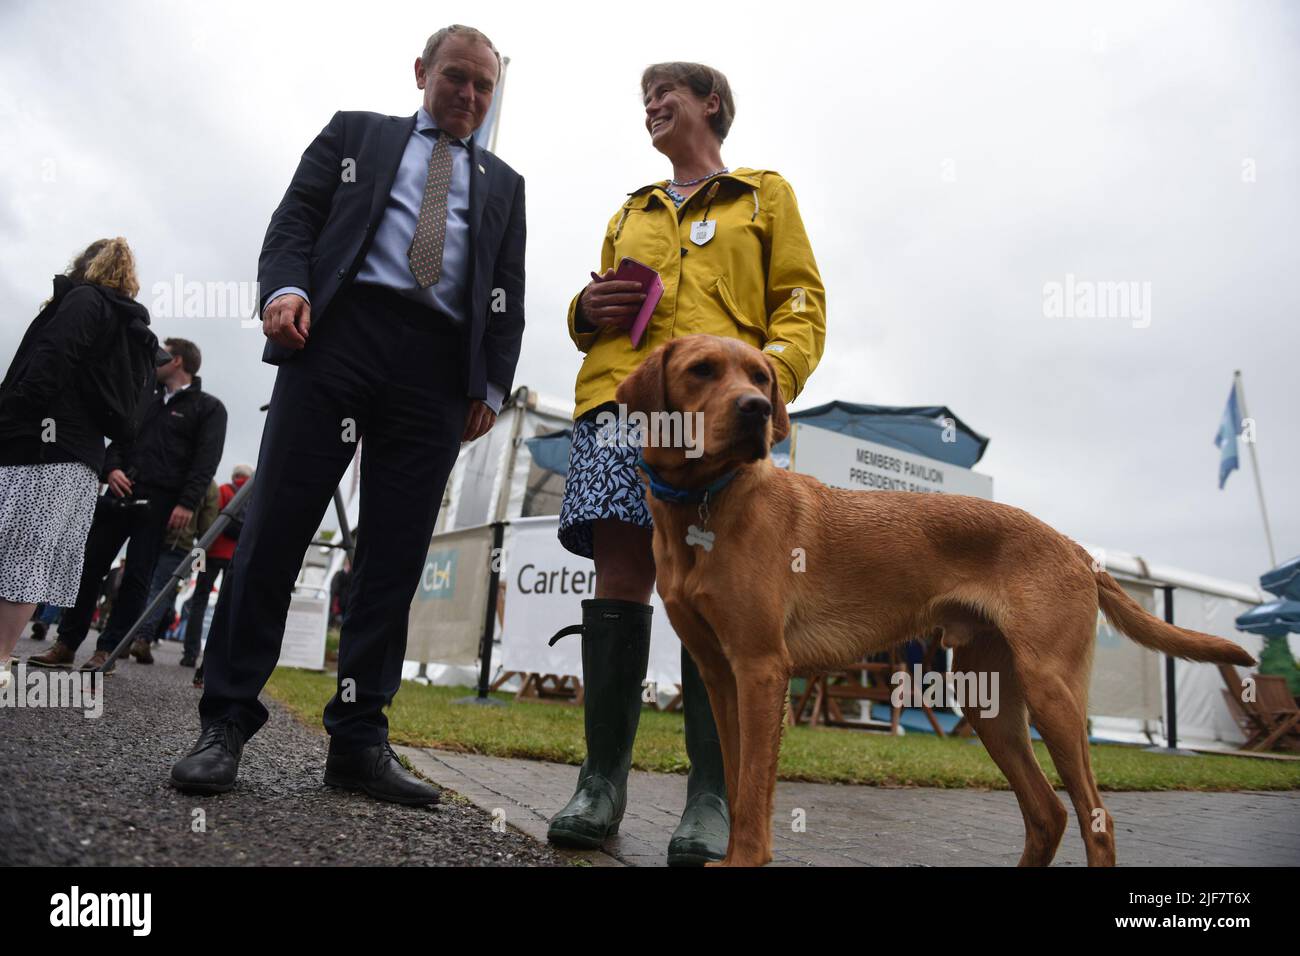 George Eustice MP, Secretary of State for Environment, Food and Rural Affairs of the United Kingdom, MP For Camborne, Meets with Selaine Saxby MP for North Cornwall, and her Dog Henry. At the Devon County Show. Stock Photo